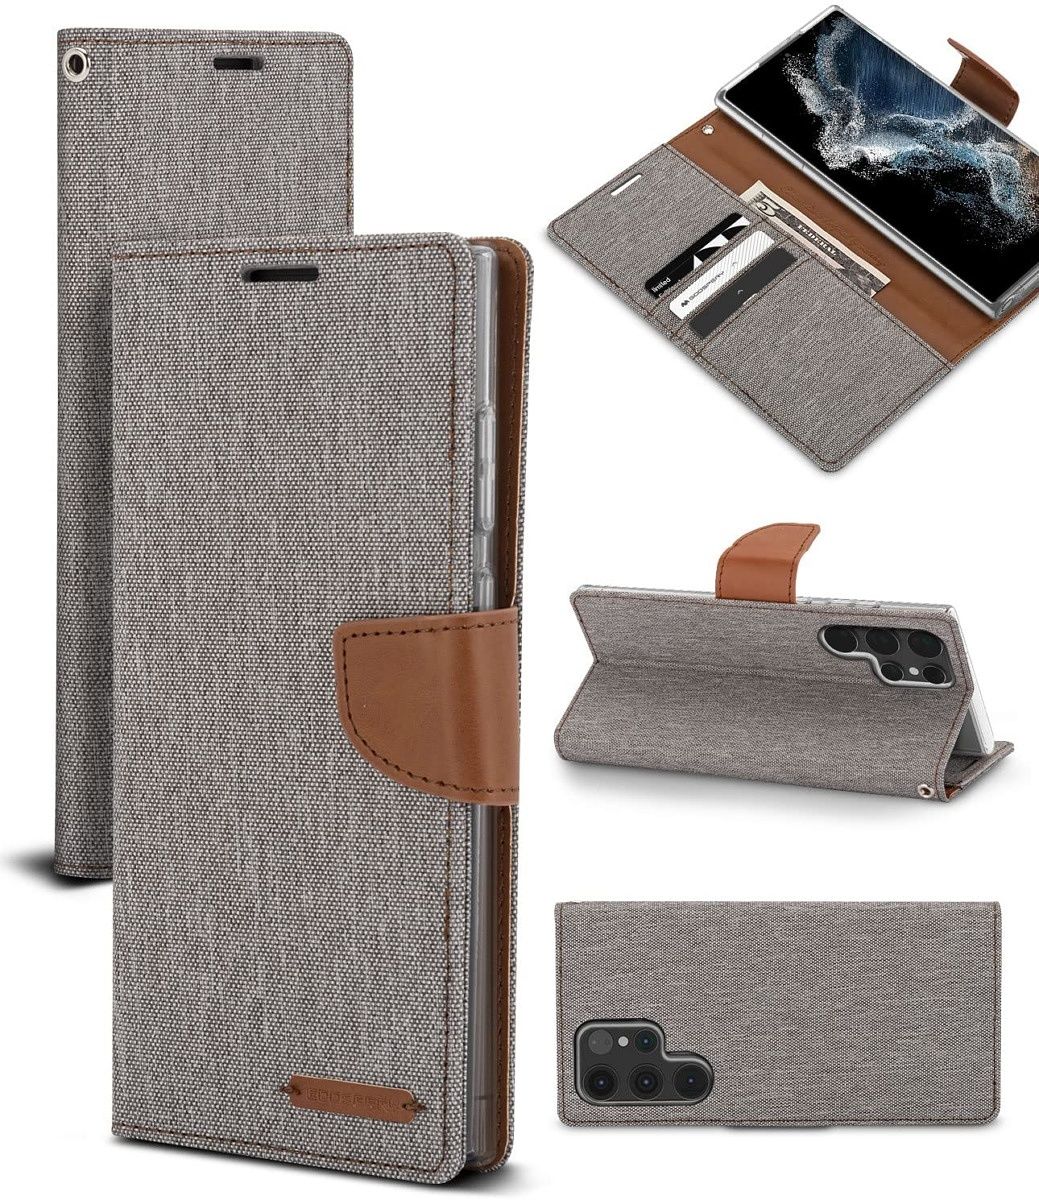 This professional wallet case comes with card slots and offers 360º protection, in addition to a kickstand for landscape viewing.